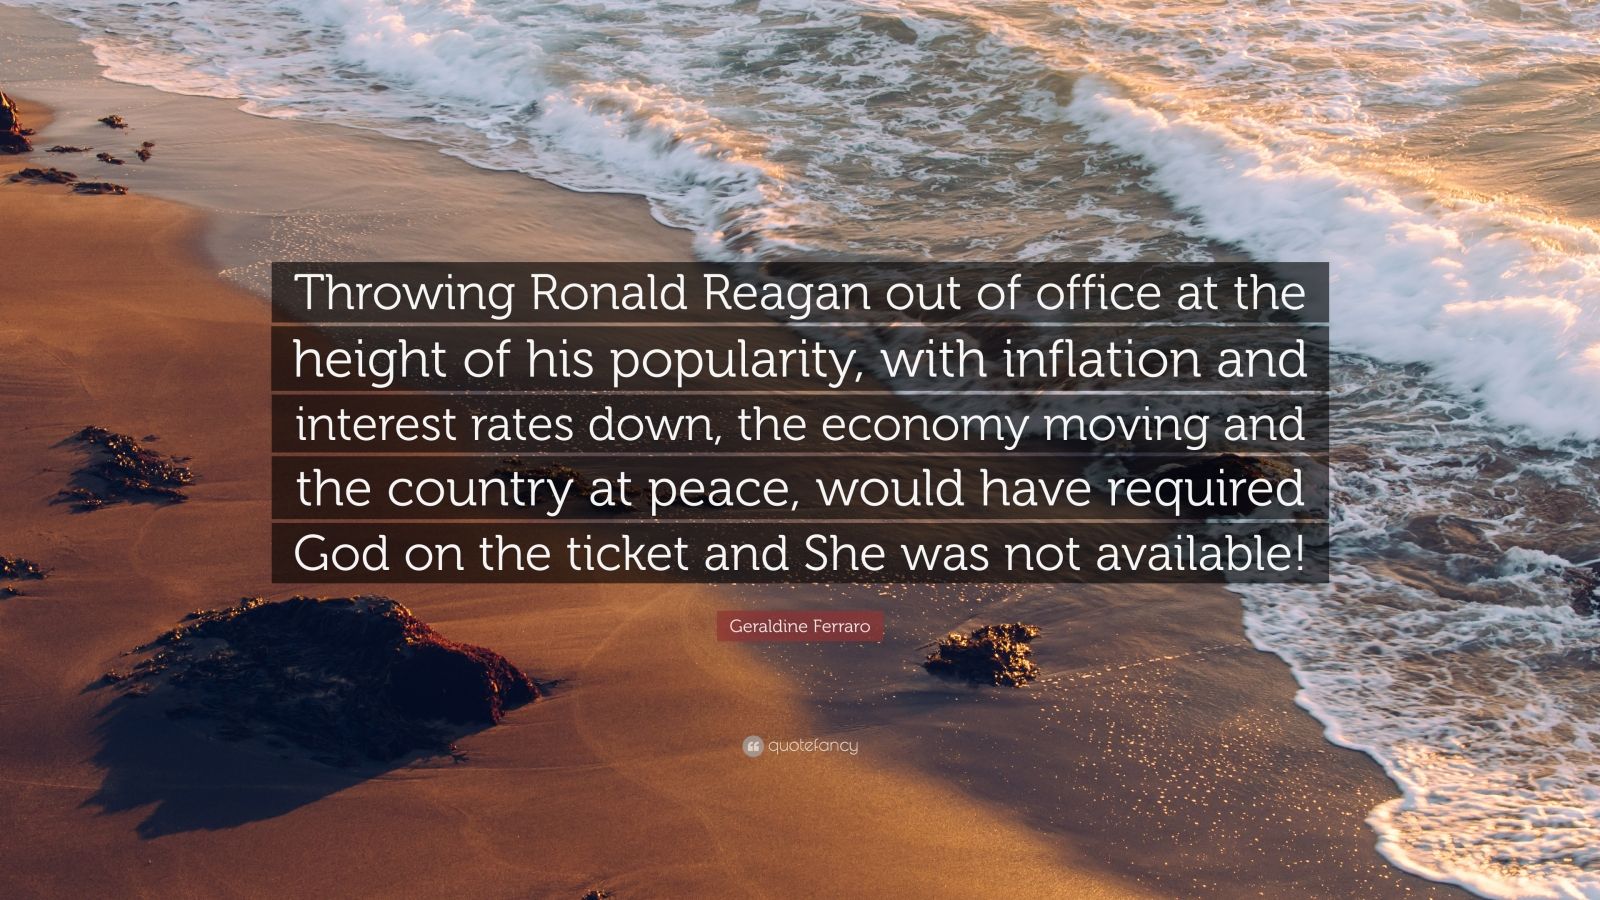 Geraldine Ferraro Quote: “Throwing Ronald Reagan out of office at the